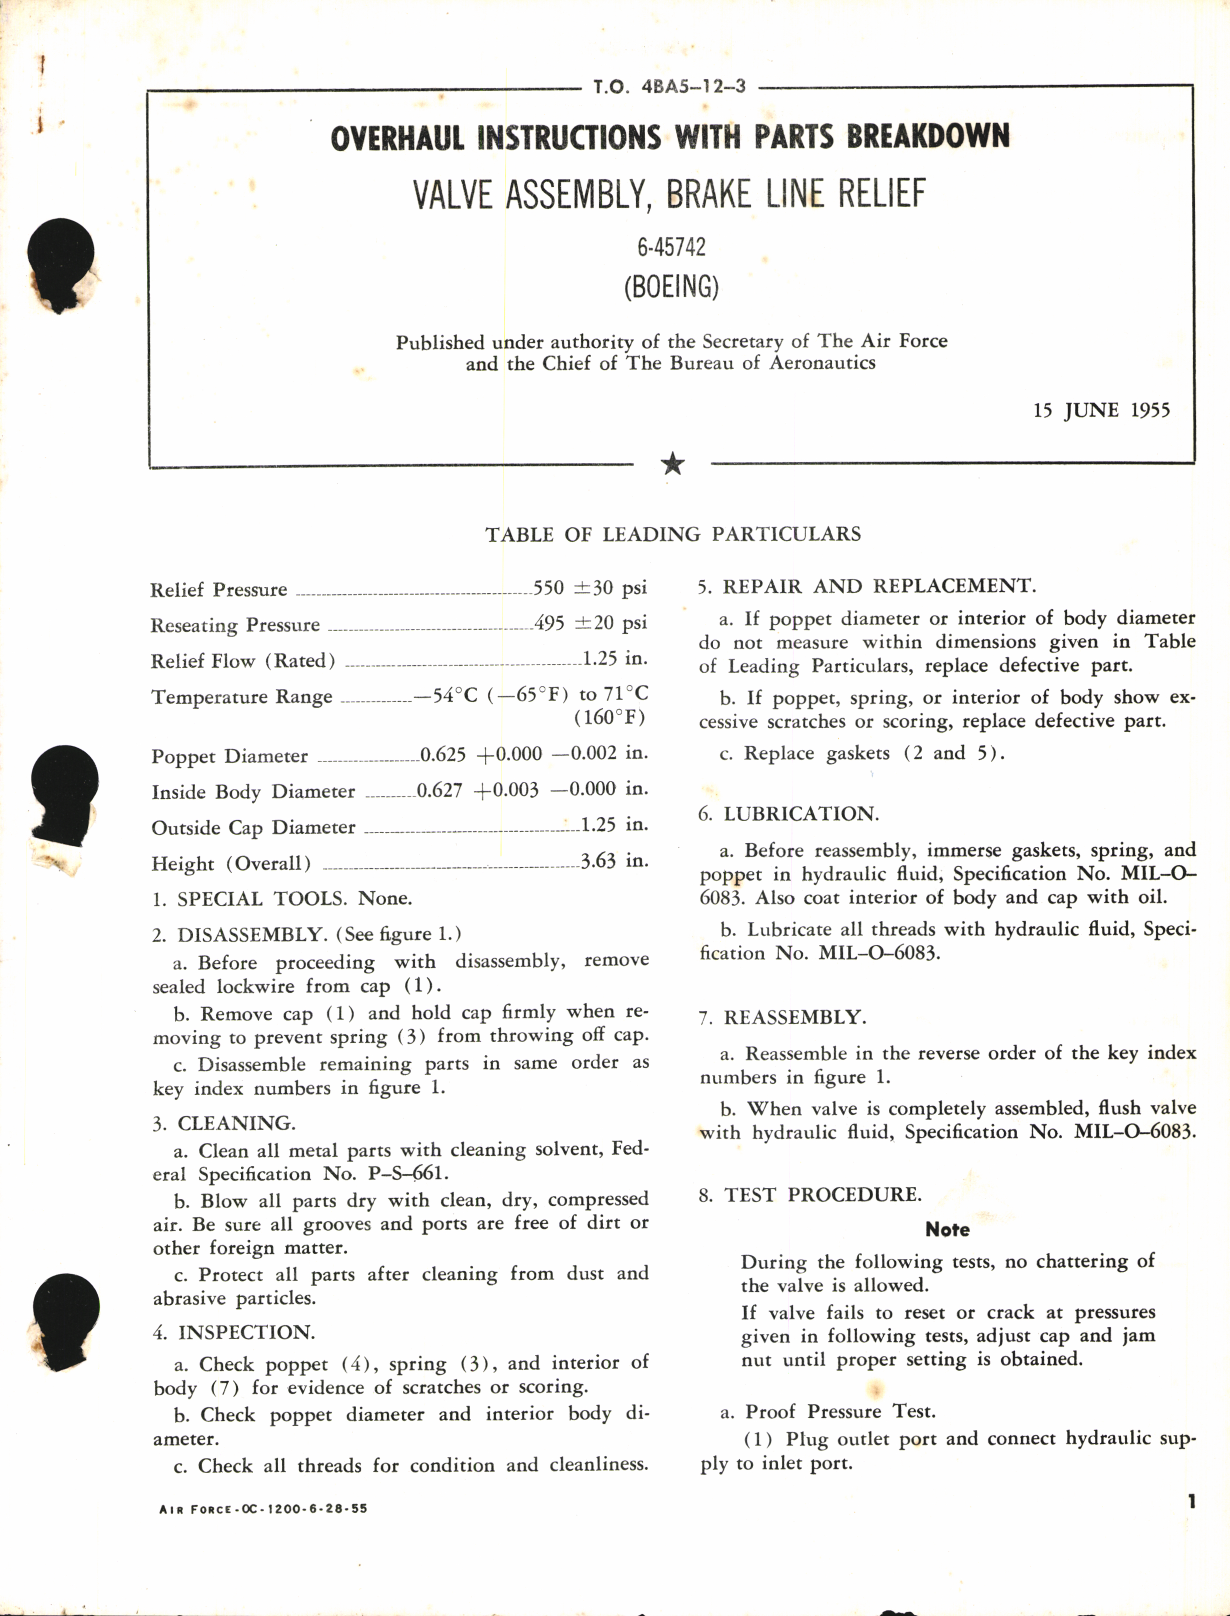 Sample page 1 from AirCorps Library document: Overhaul Instructions with Parts Breakdown for Valve Assembly, Brake Line Relief